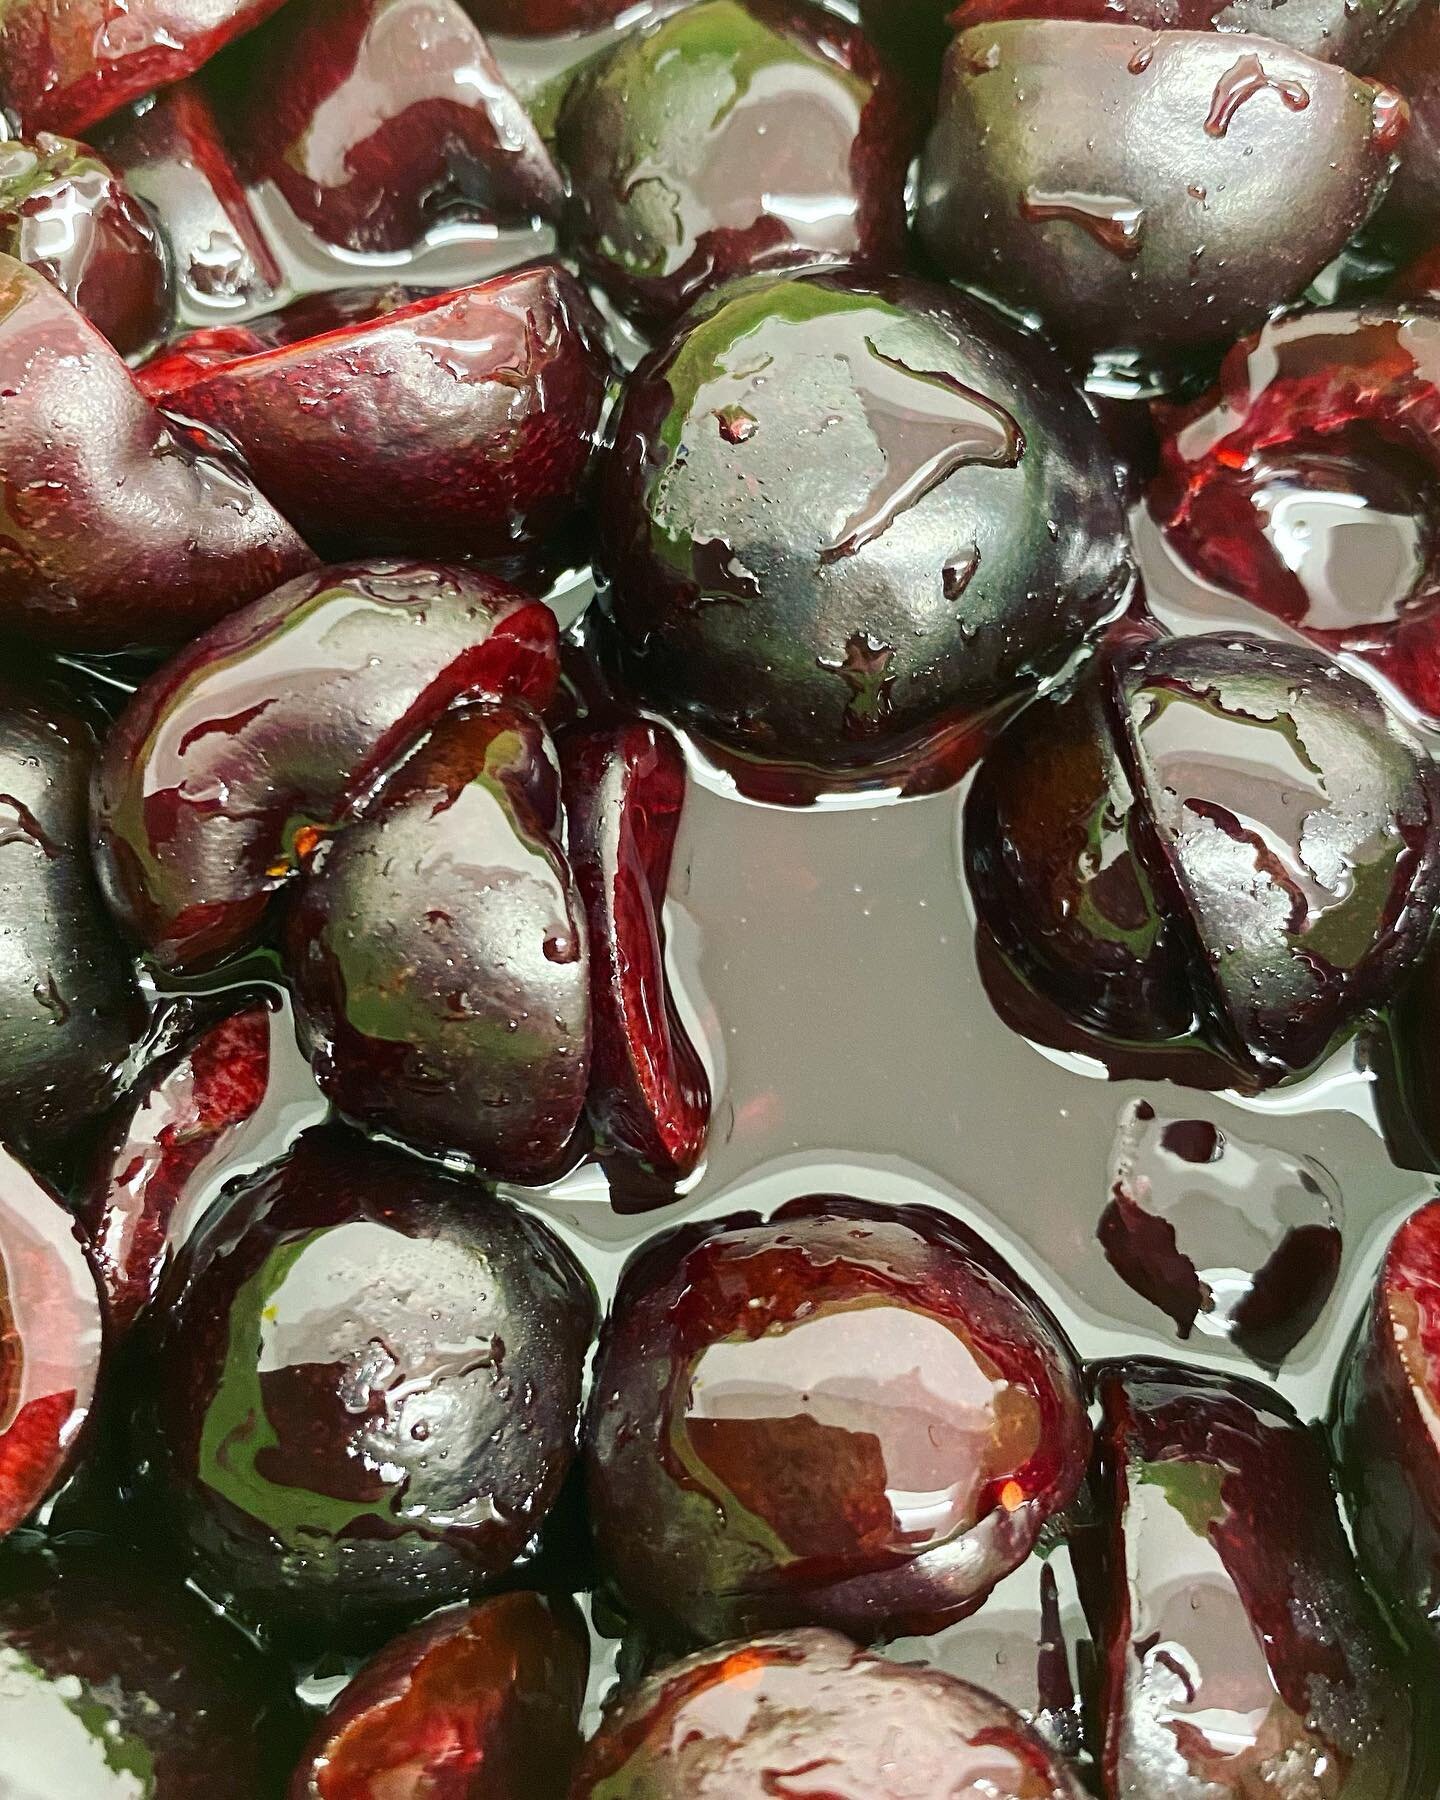 Kirsch black cherries can only mean one thing&hellip;

The Black Forest cake is on its way! 

#pastrychef #patisserie #cheshire #cheshirebusiness #cheshirefood #cheshirefoodies #pastry #blackforest